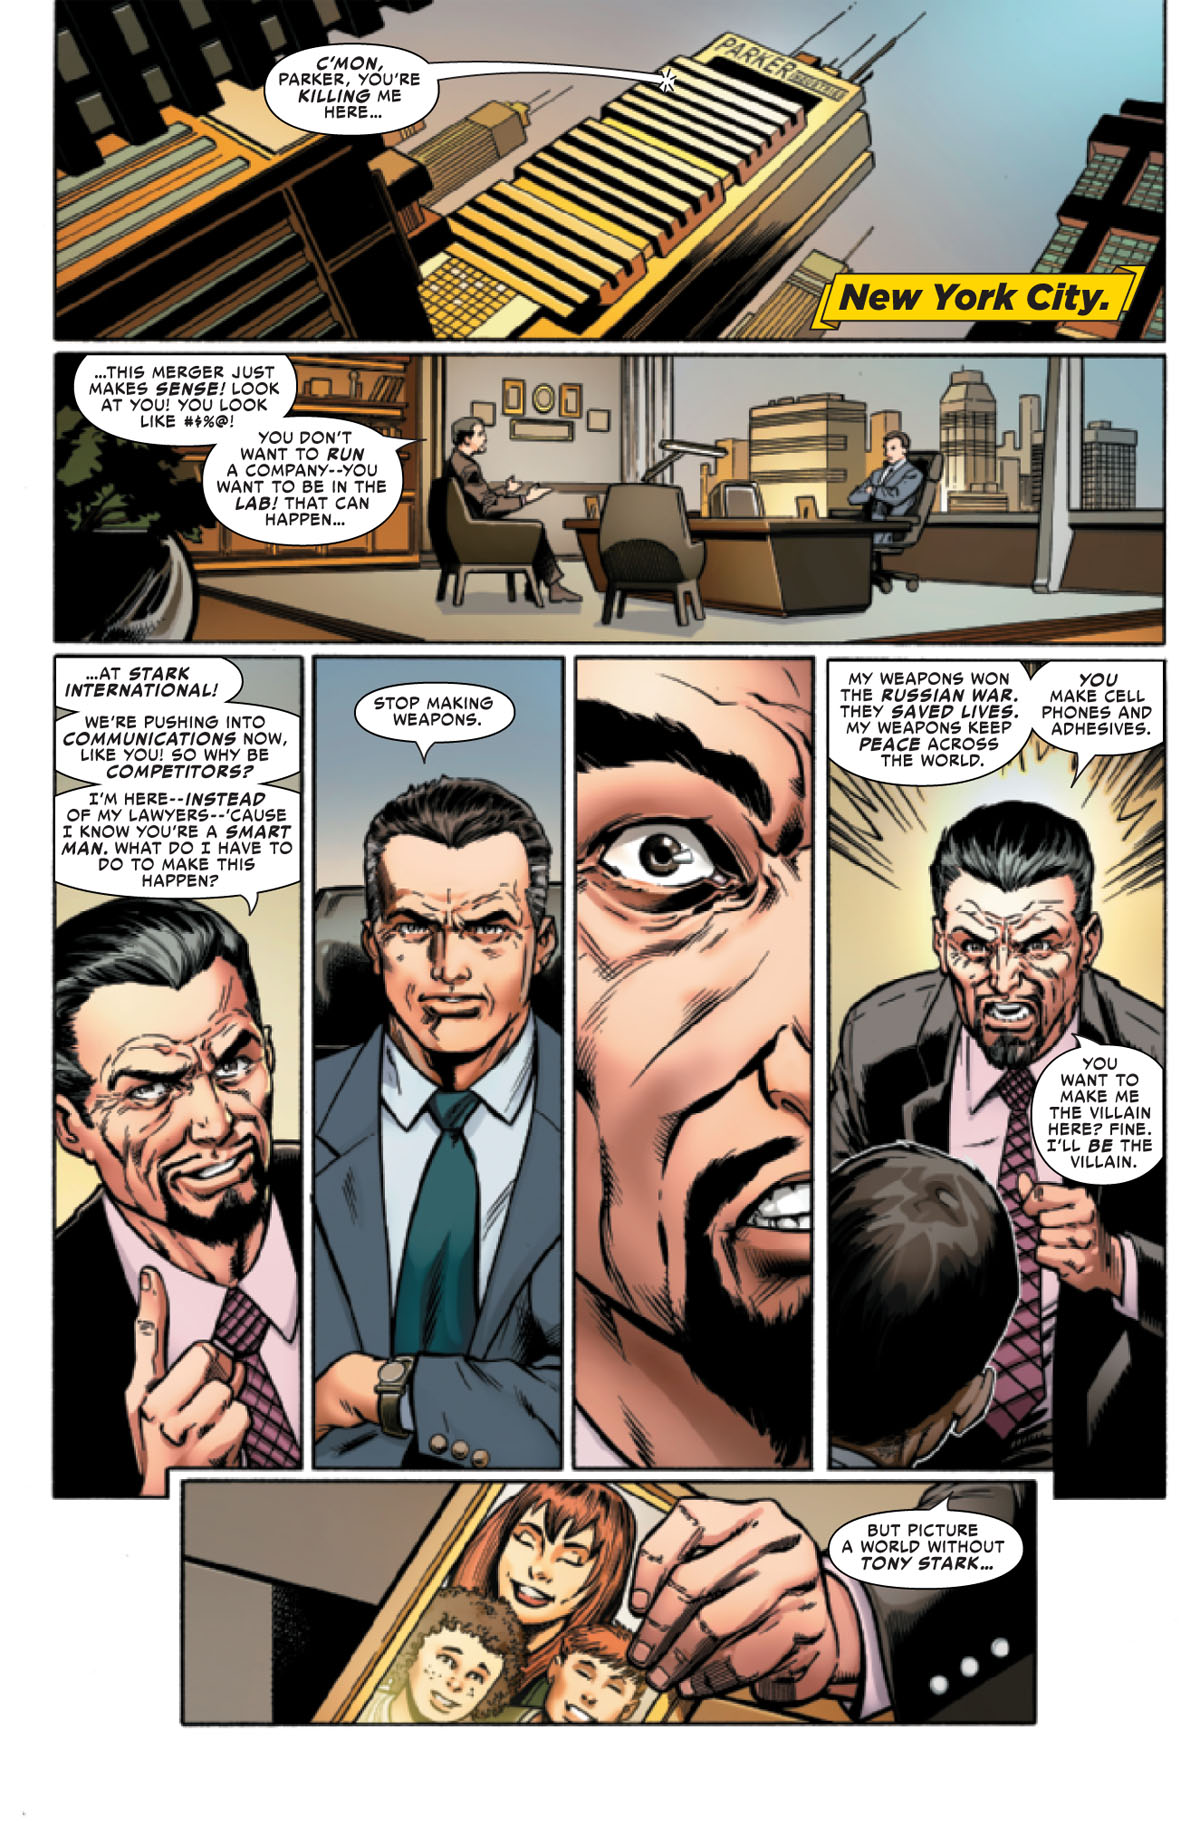 Spider-Man: Life Story #4 page 3